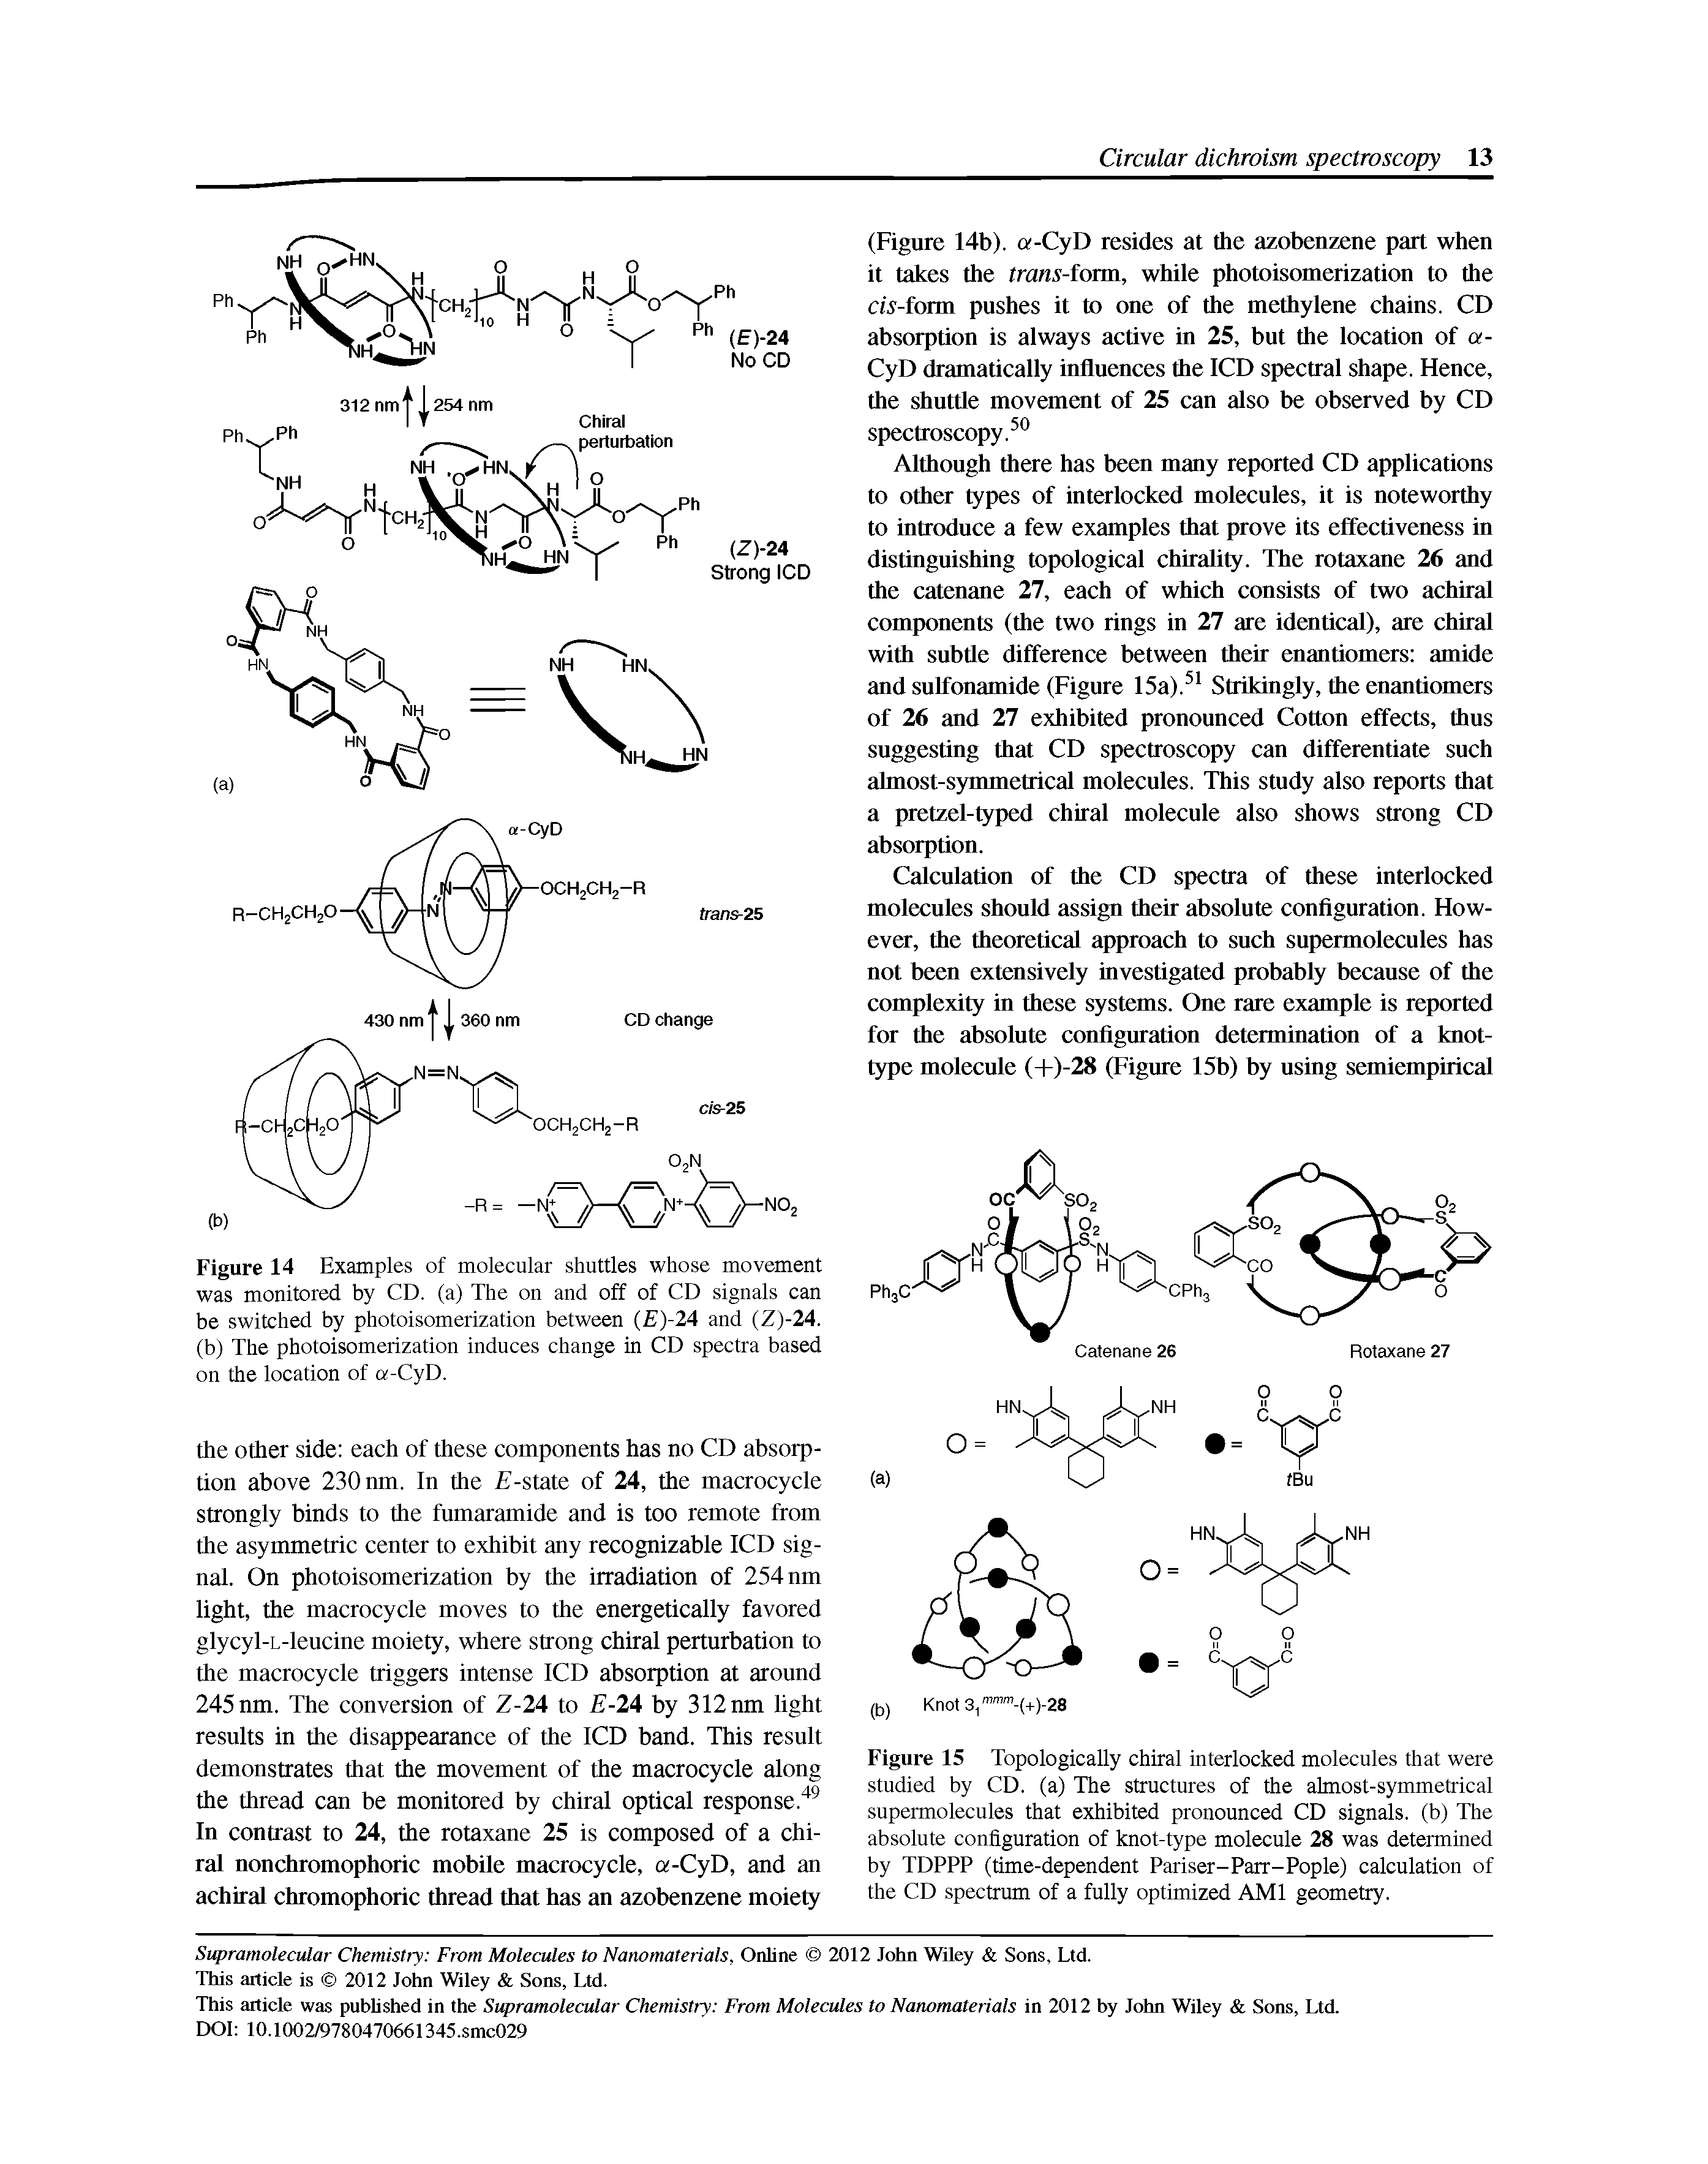 Figure 15 Topologically chiral interlocked molecules that were studied by CD. (a) The structures of the ahnost-symmetrical supermolecules that exhibited pronounced CD signals, (b) The absolute configuration of knot-type molecule 28 was determined by TDPPP (time-dependent Pariser-Parr-Pople) calculation of the CD spectrum of a fully optimized AMI geometry.